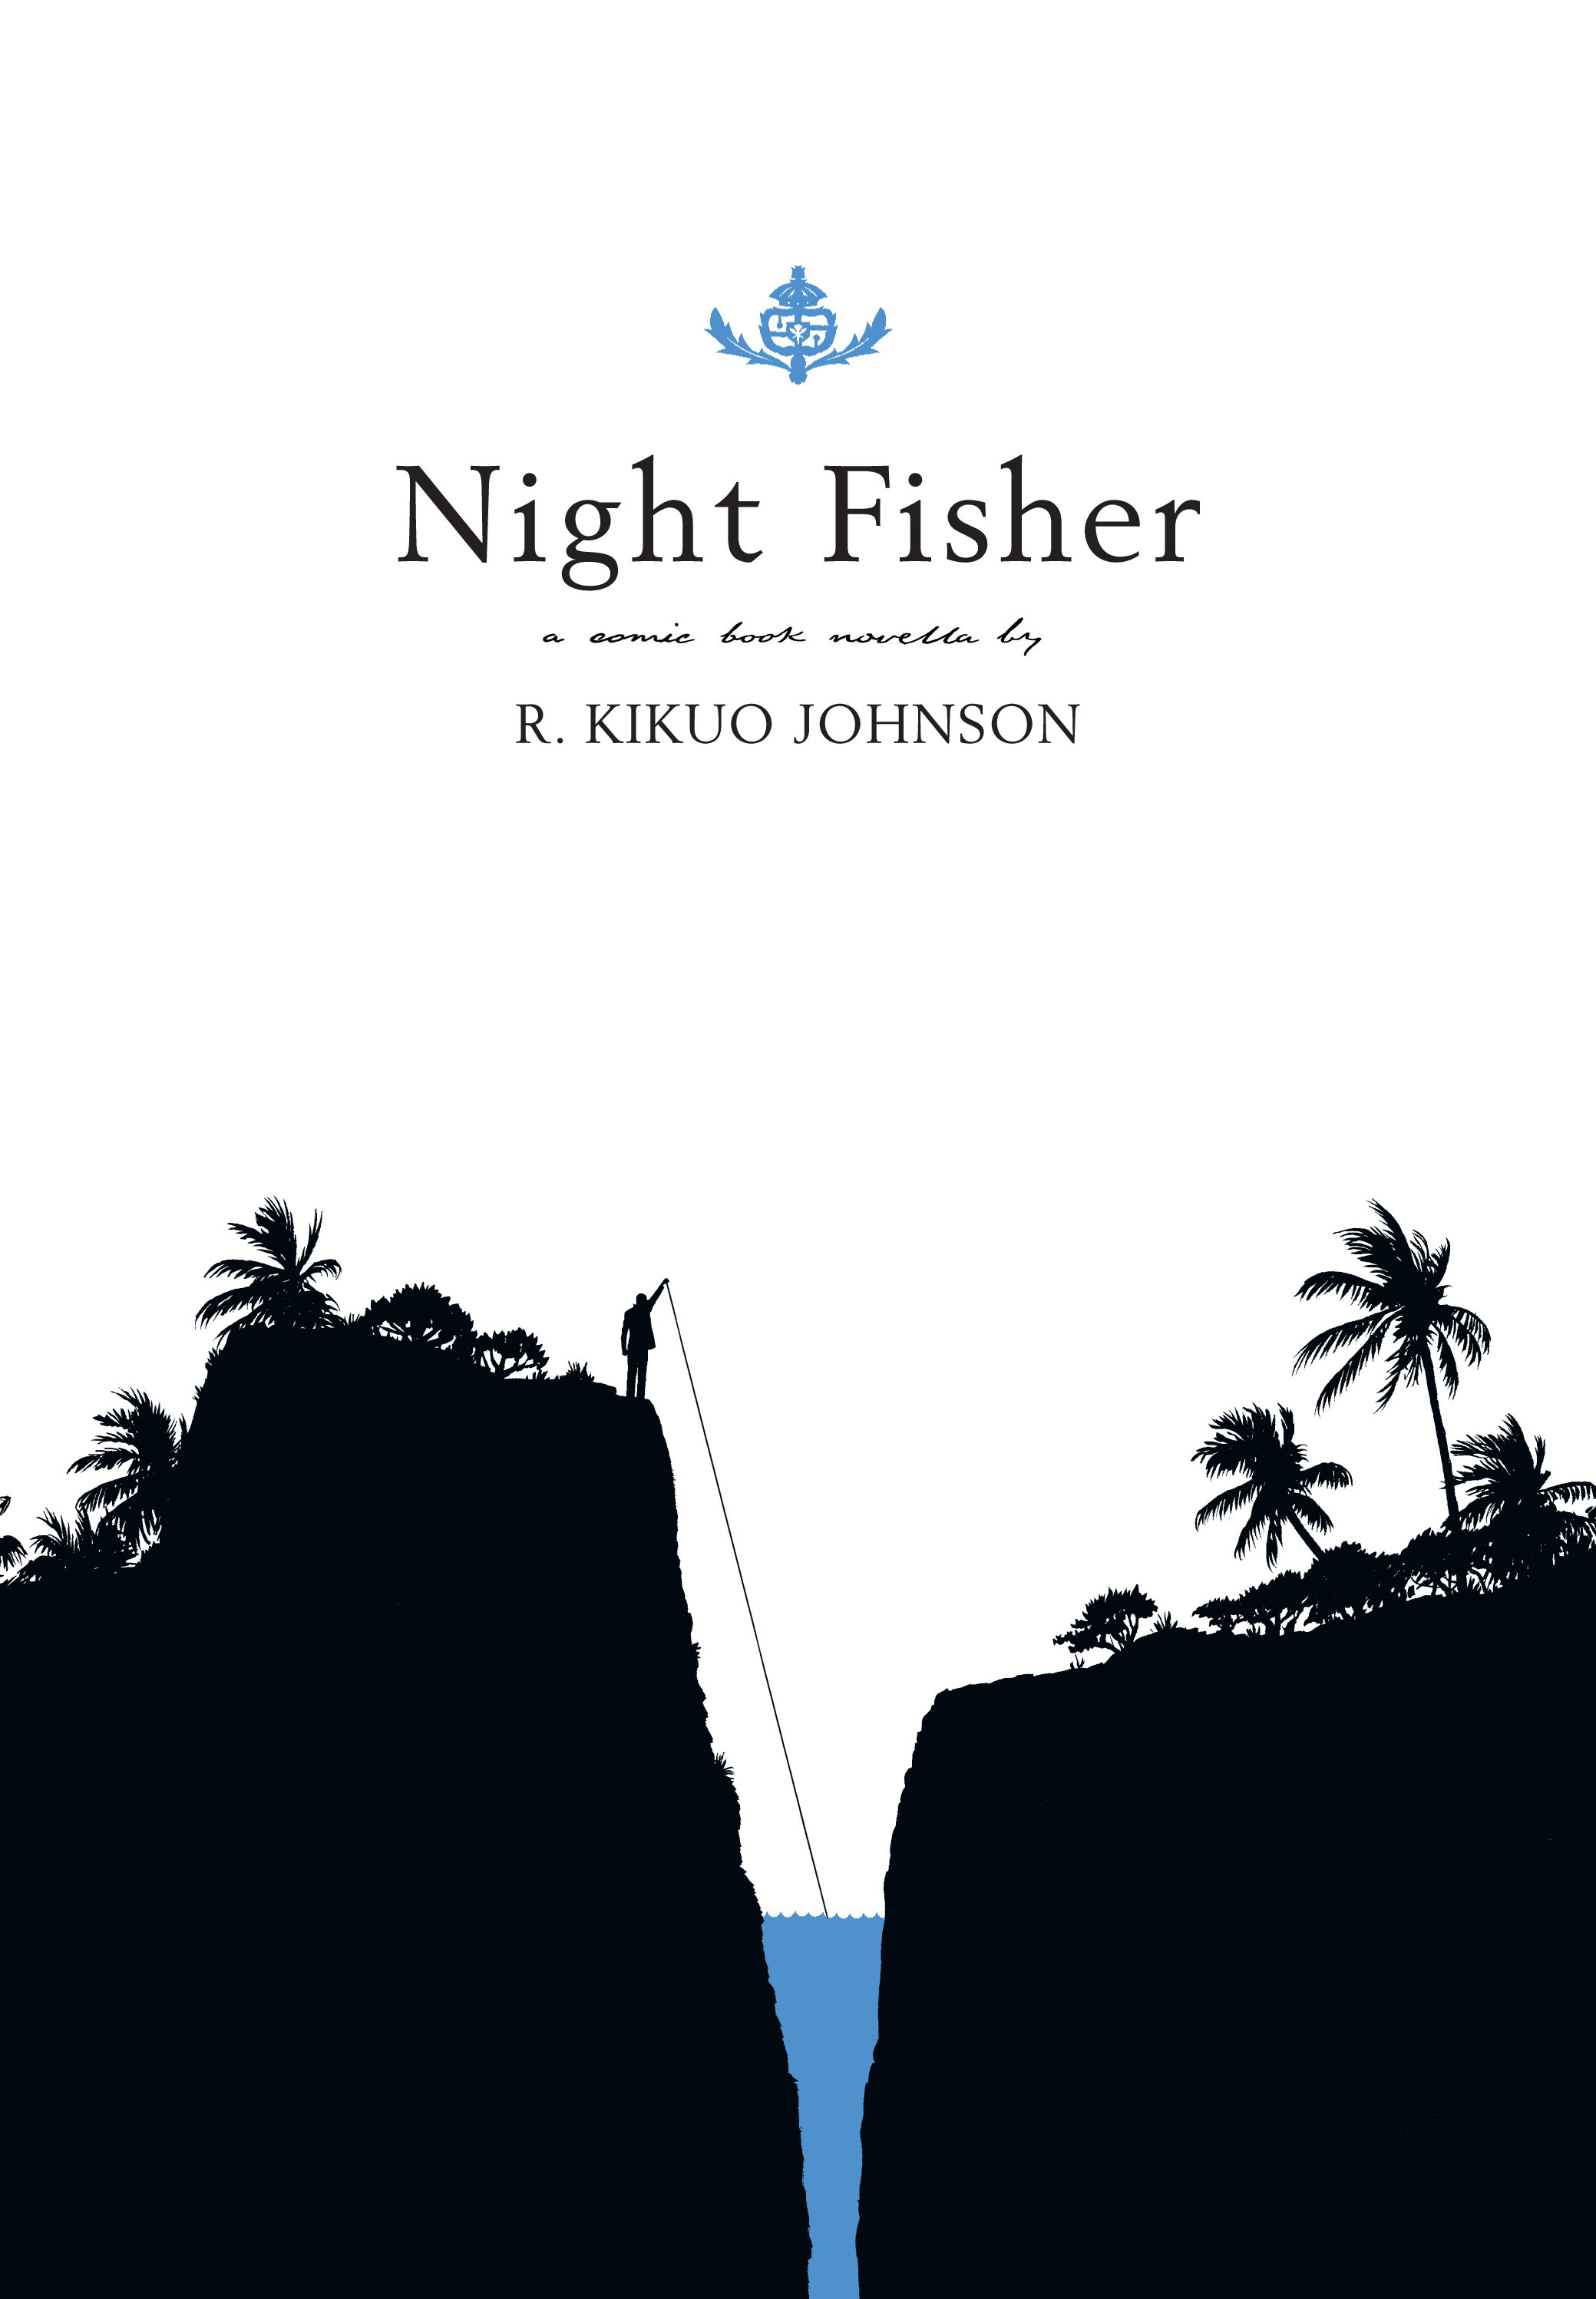 Read online Night Fisher comic -  Issue # TPB - 1